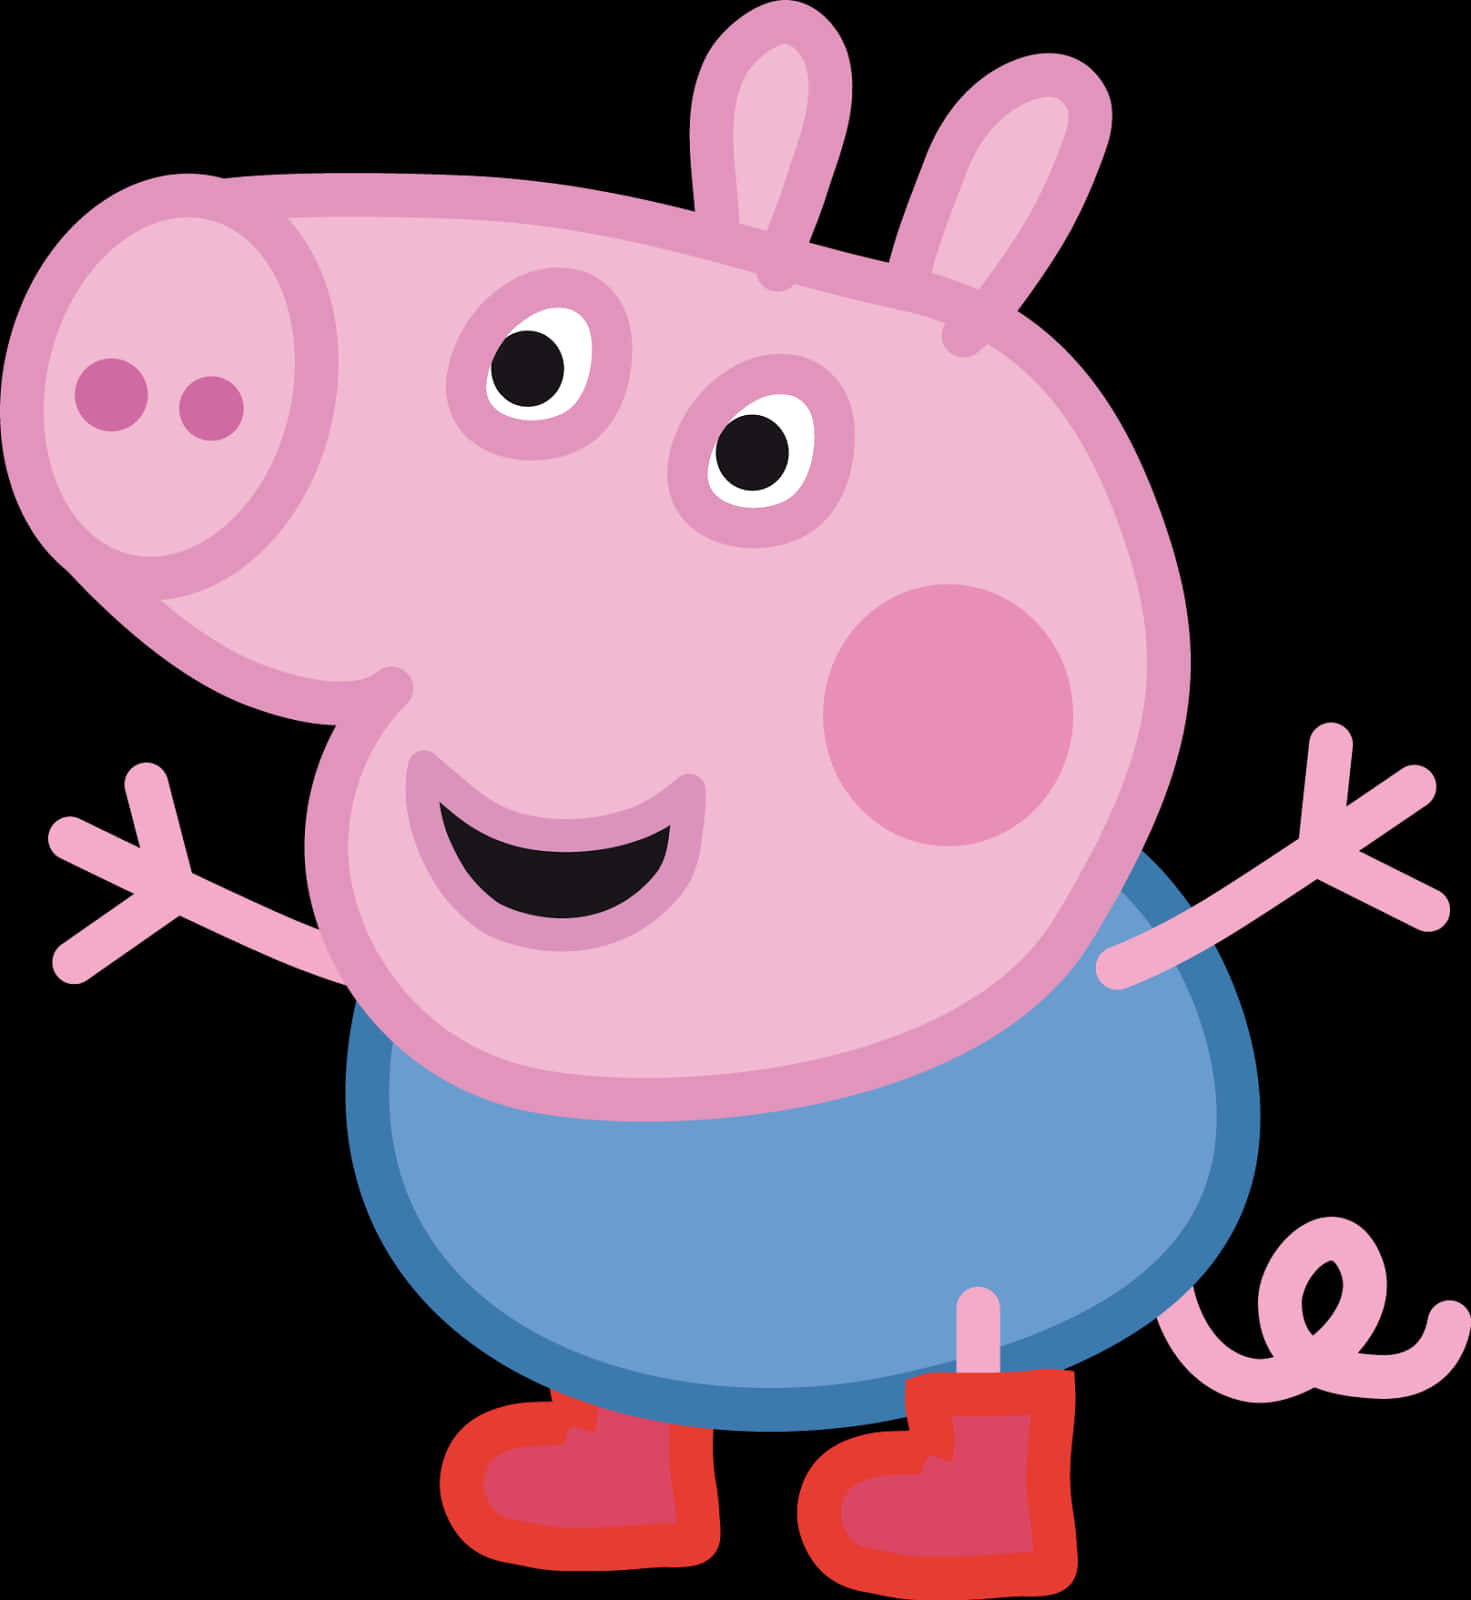 A Cartoon Pig With Red Shoes And Blue Pants